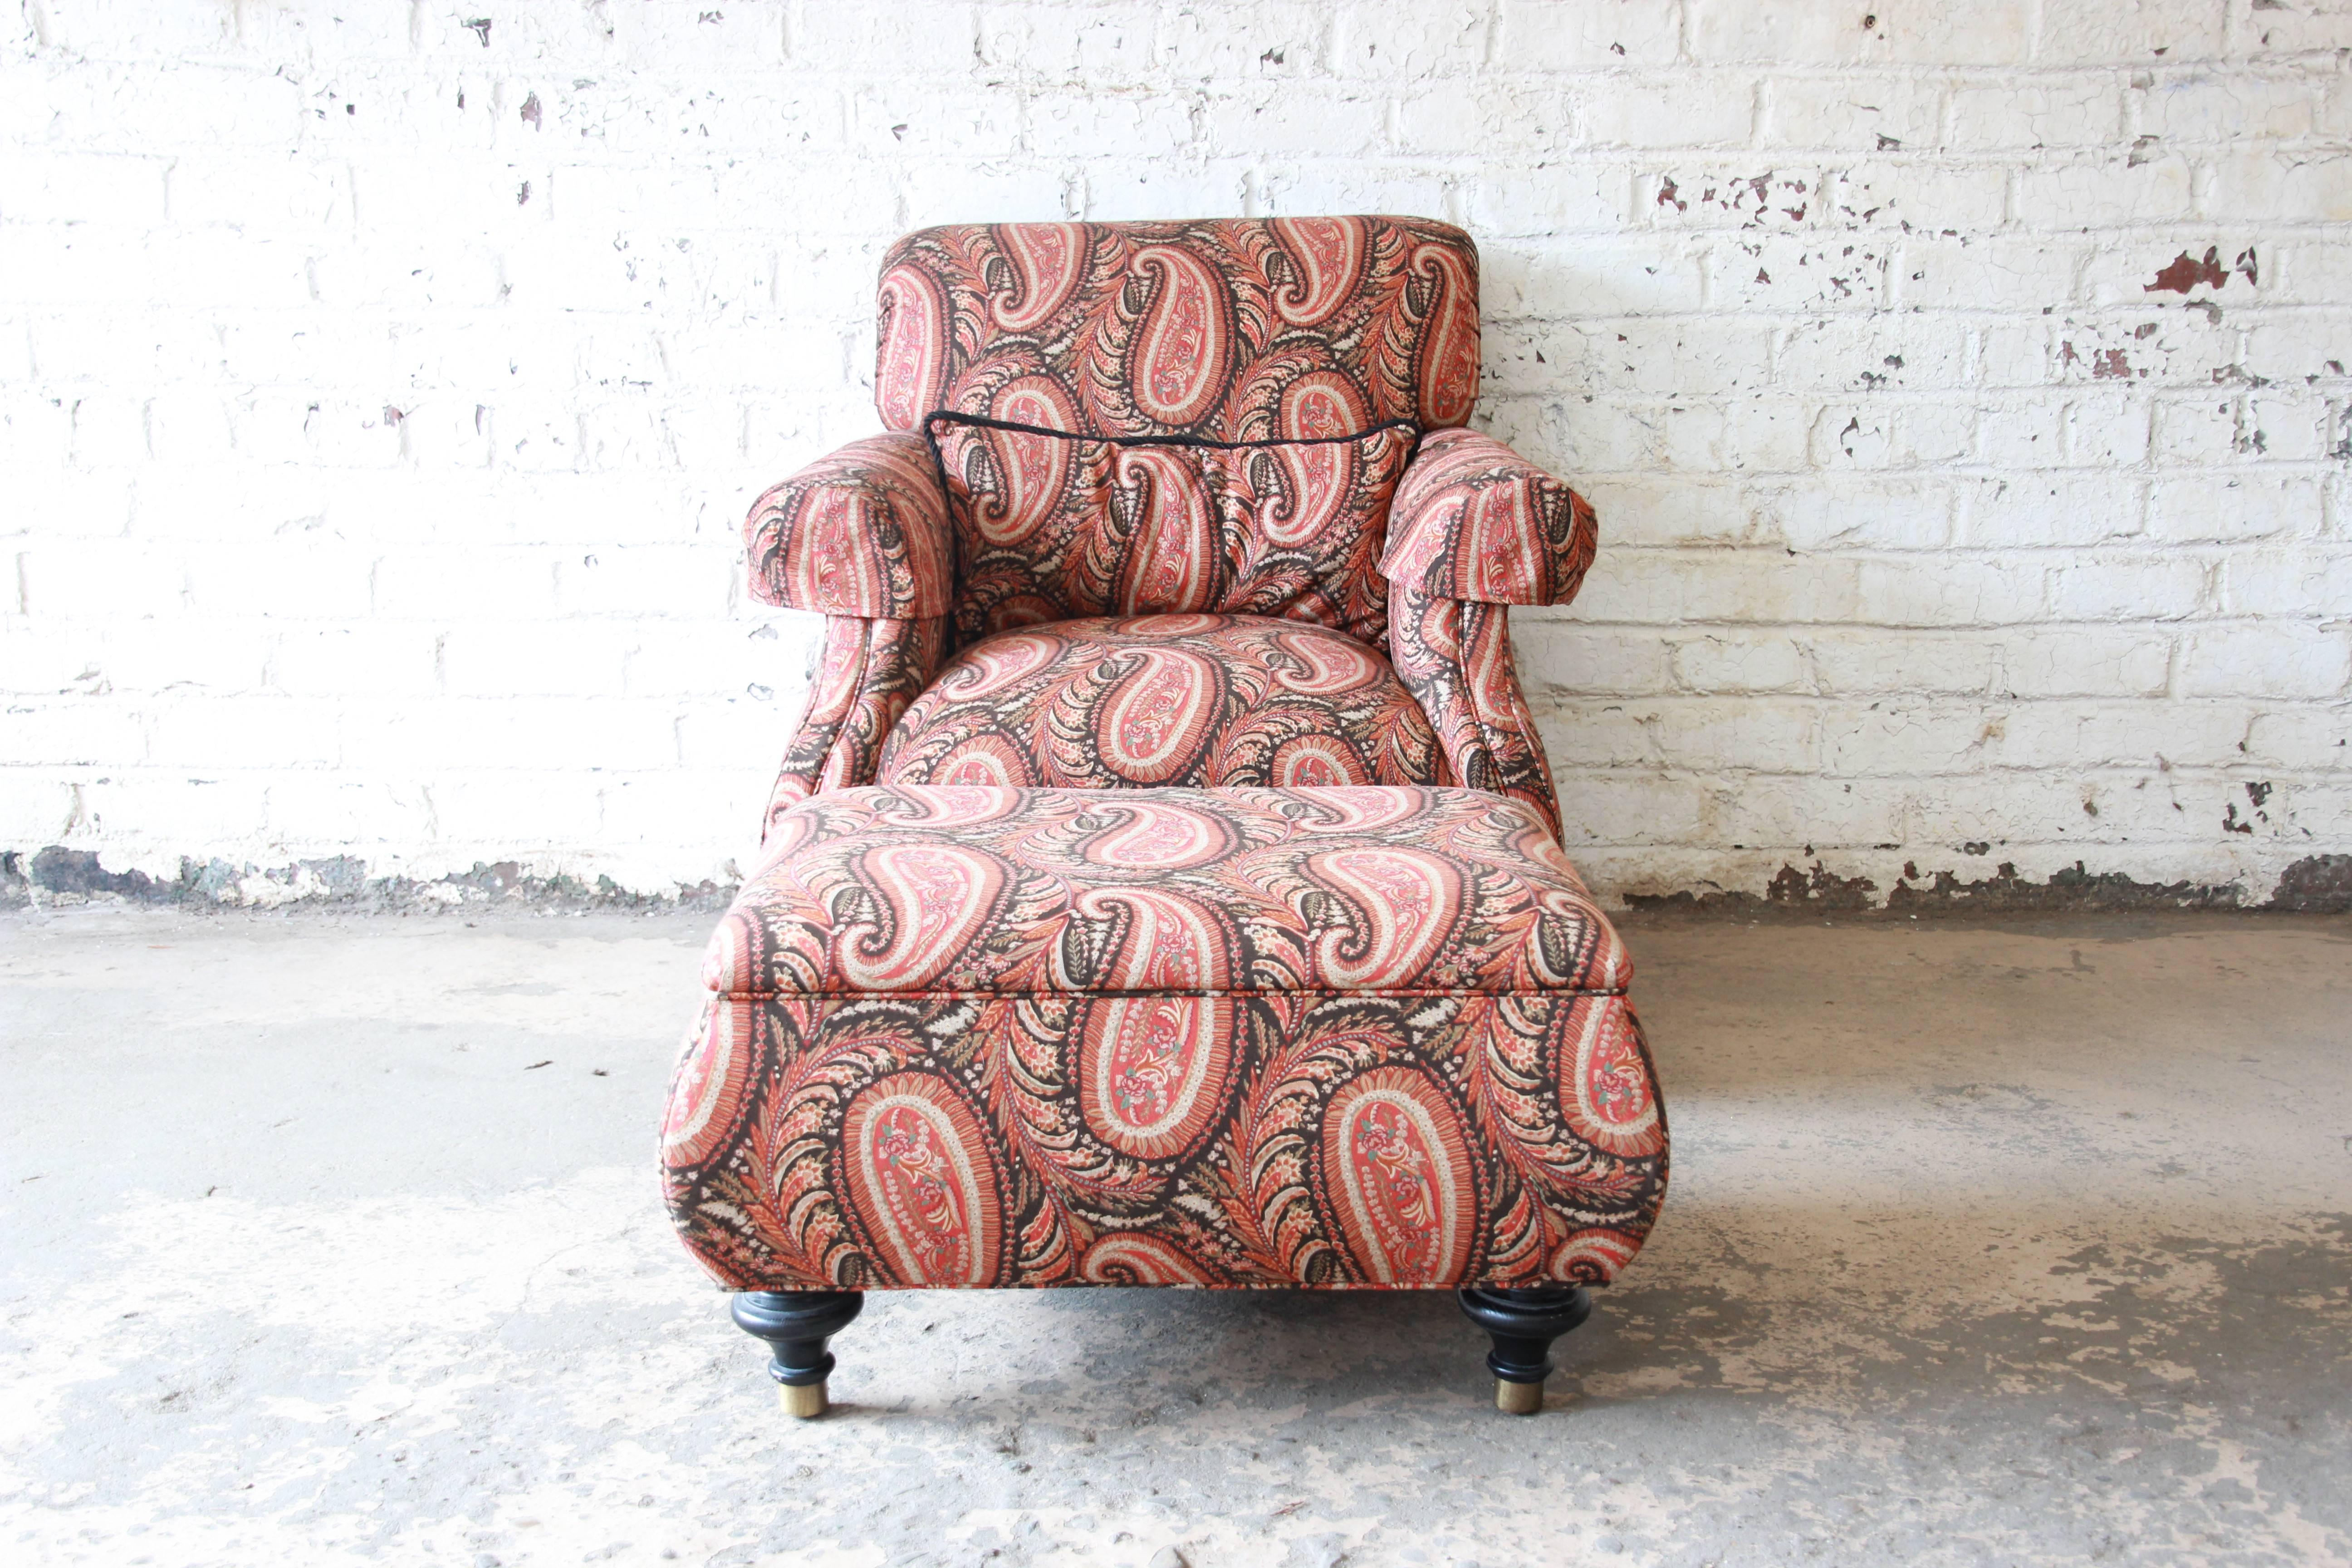 Offering a very nice and elegant Kravet lounge chair and ottoman in paisley upholstery. The chairs is comfortable with clean upholstery with no smells or tears. It sits on ebonized brass tipped feet. It comes with an accent pillow. The chair and